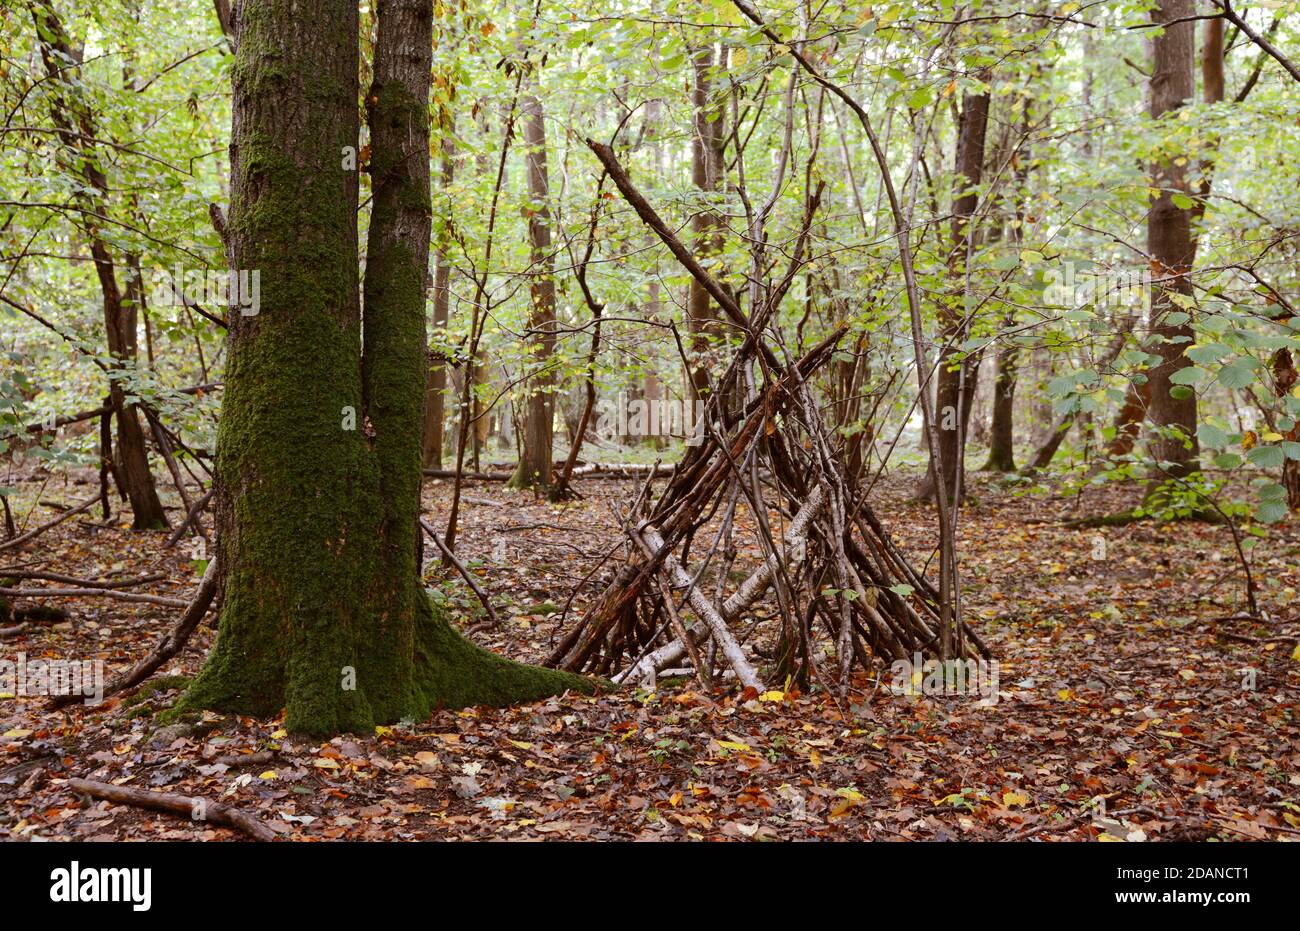 Improvised wigwam shelter built from fallen branches among mossy trees in an autumnal forest Stock Photo